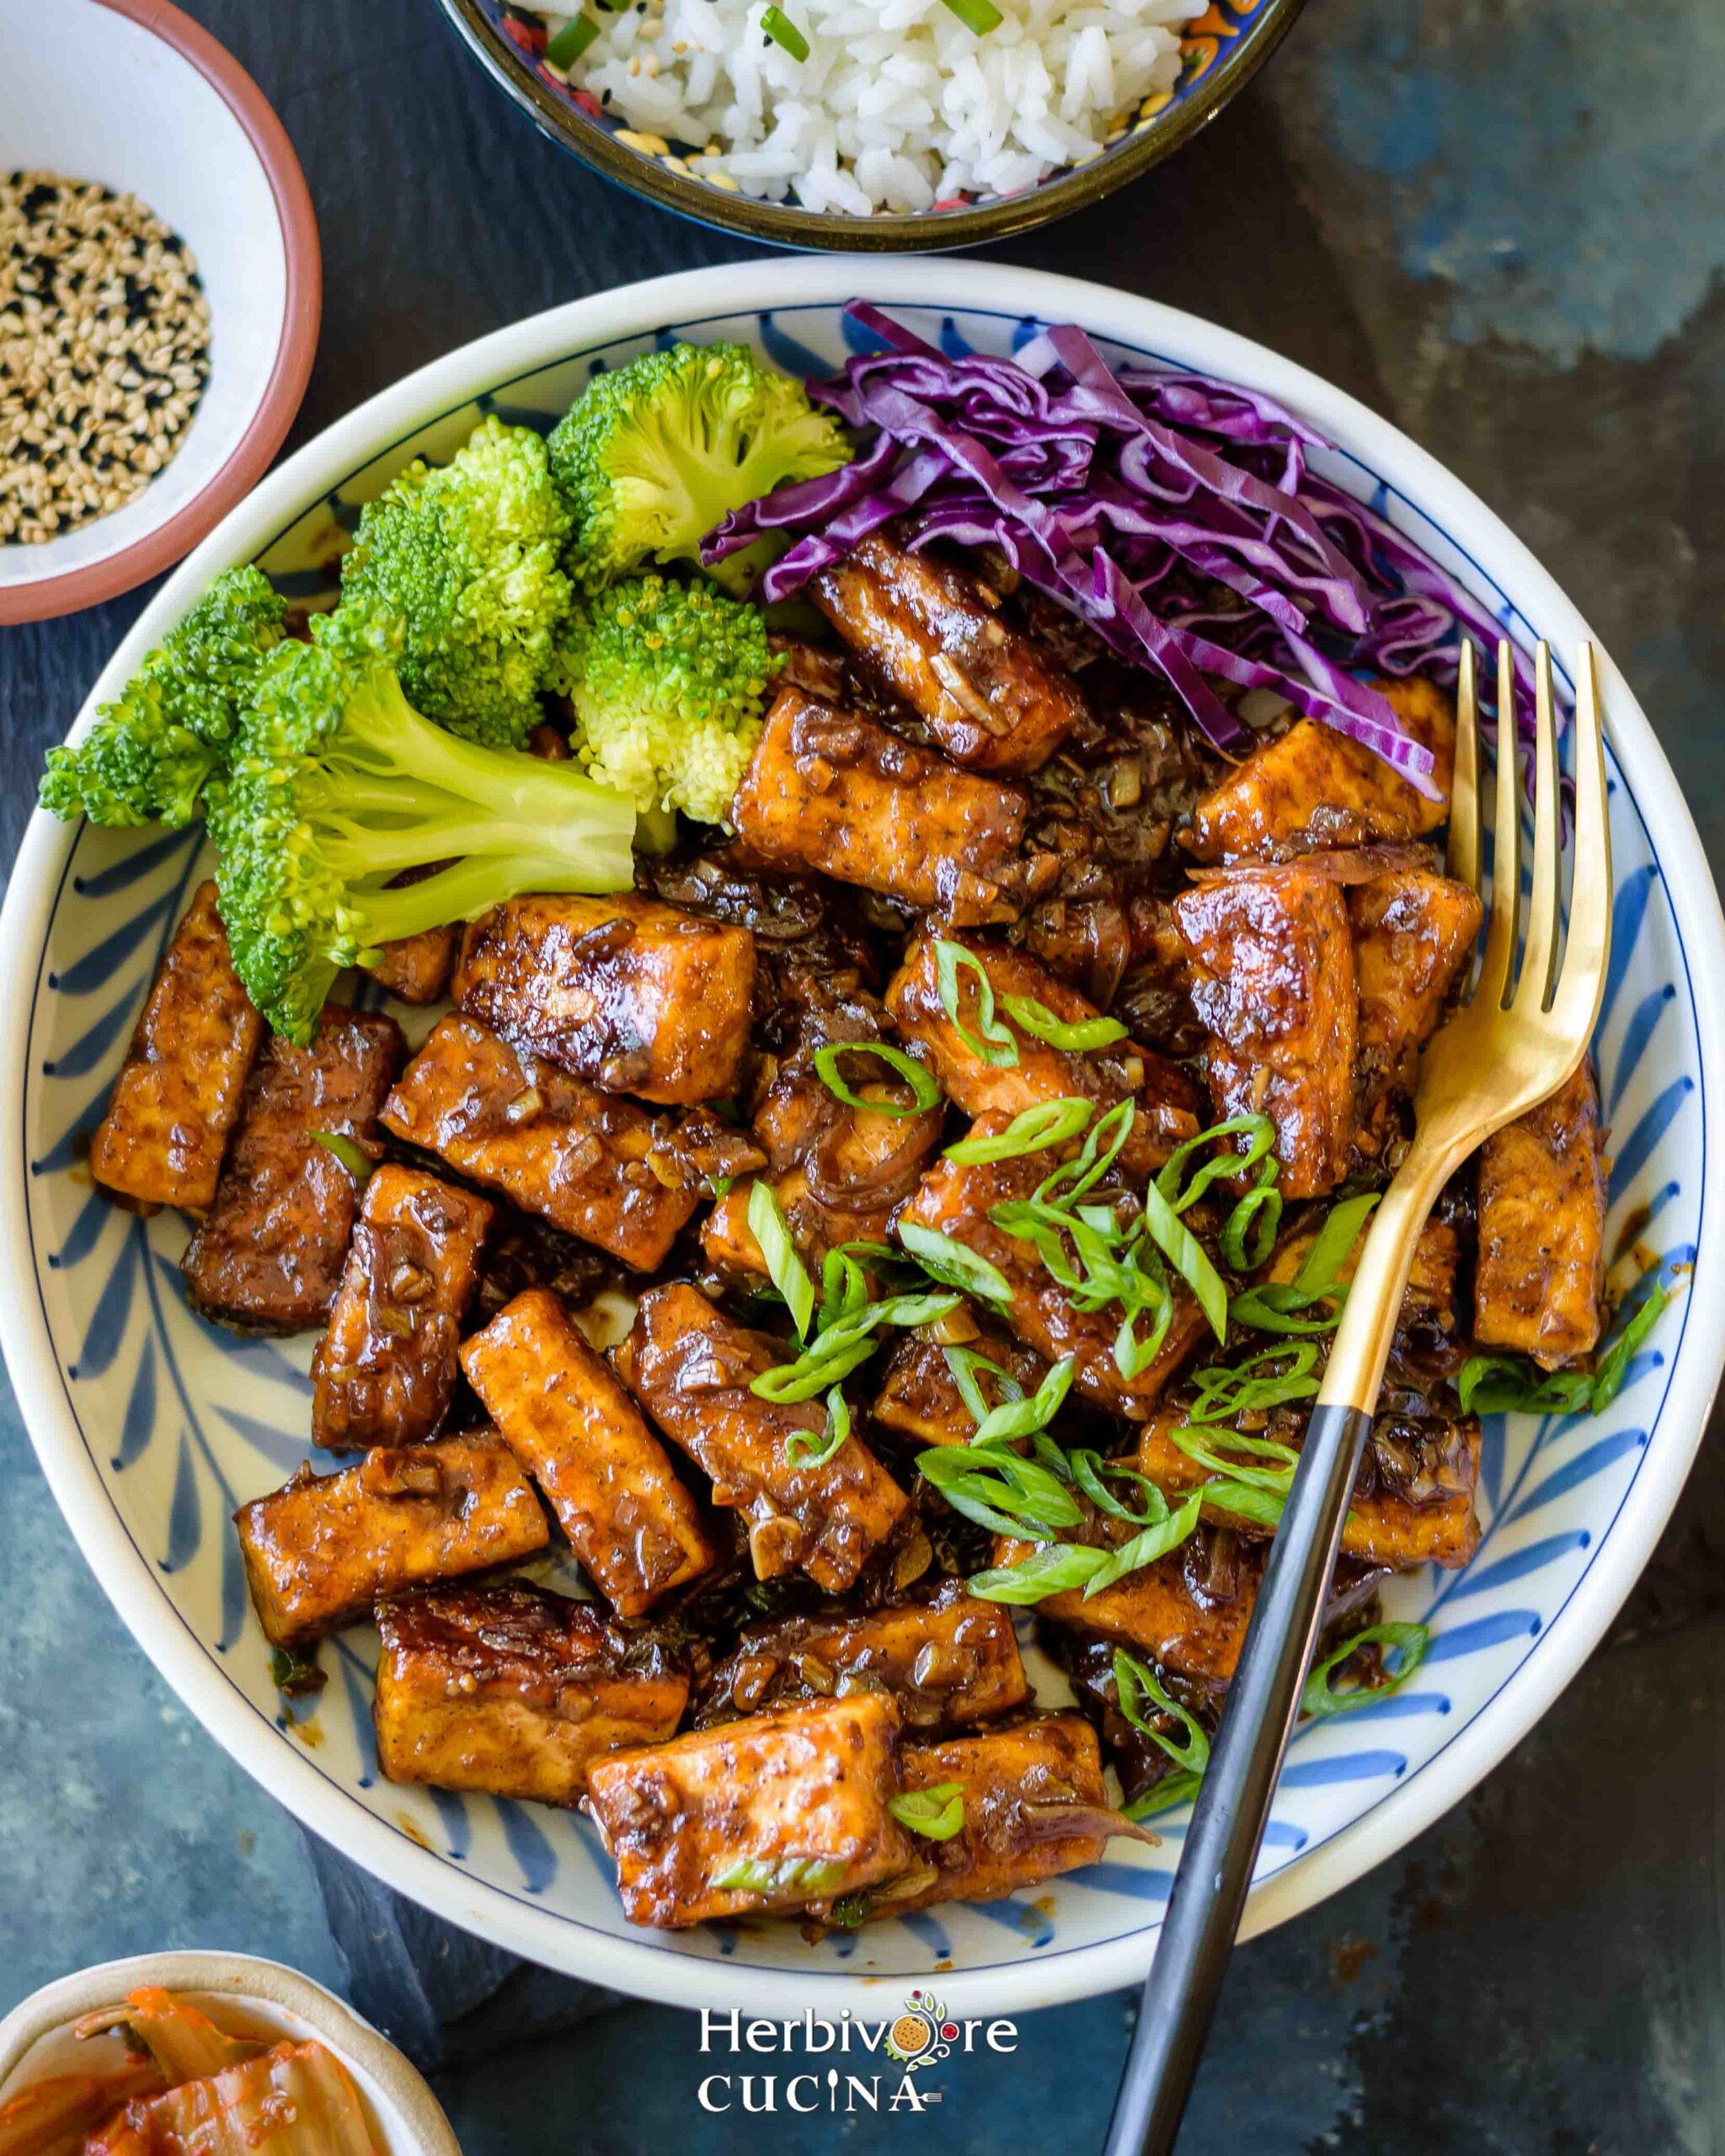 Stir fried tofu topped with scallions served with steamed broccoli and slaw in a plate. 